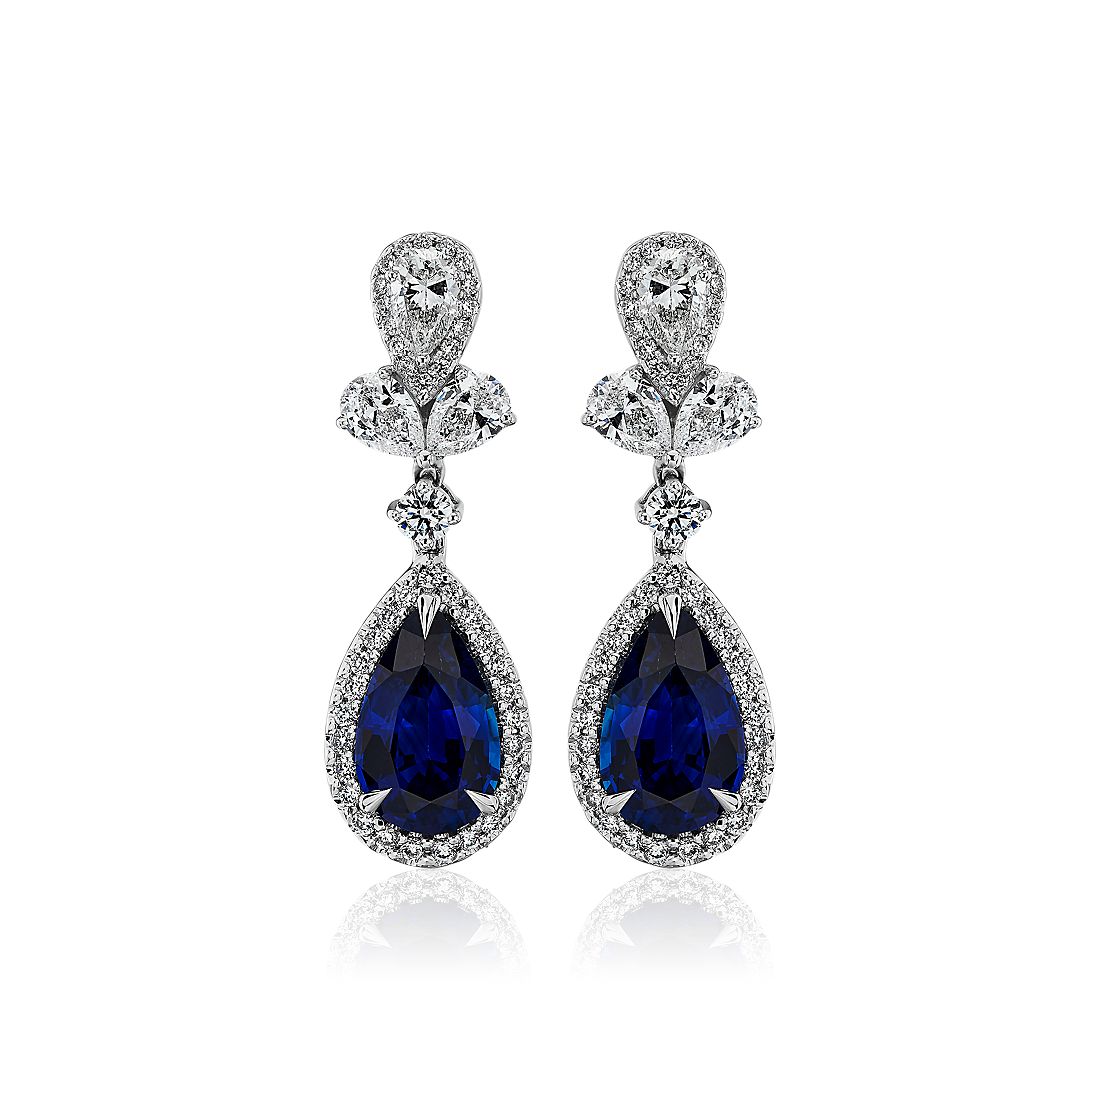 Triomphe Pear Shape Sapphire and Diamond Drop Earrings in 18k White Gold (3.37 cts)